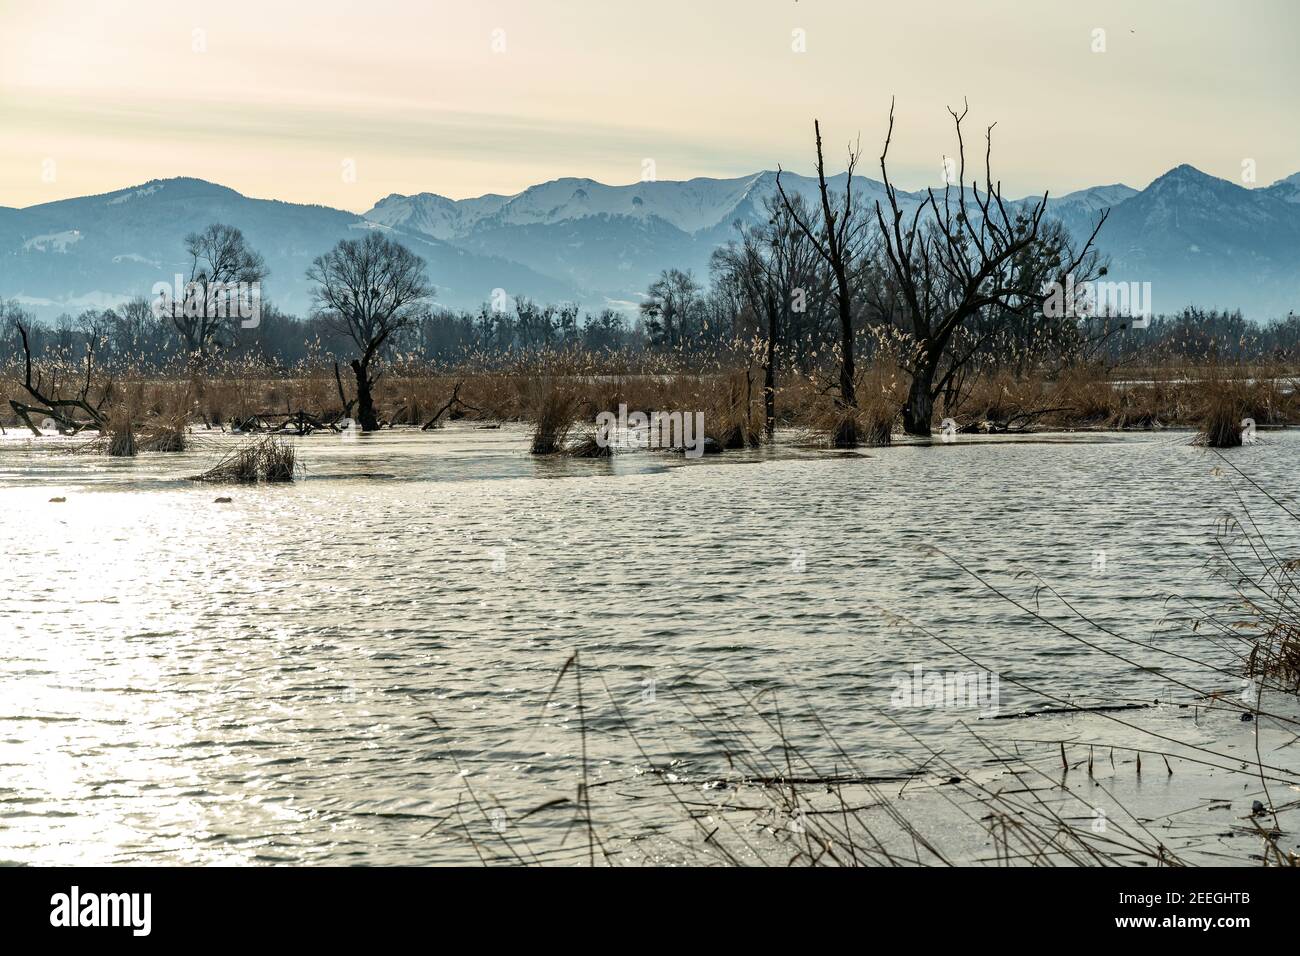 Tench holes in the morning light in winter cold. Shore of Lake Constance with reeds, bushes and trees. Vorarlberg mountains in the background. Hard Stock Photo